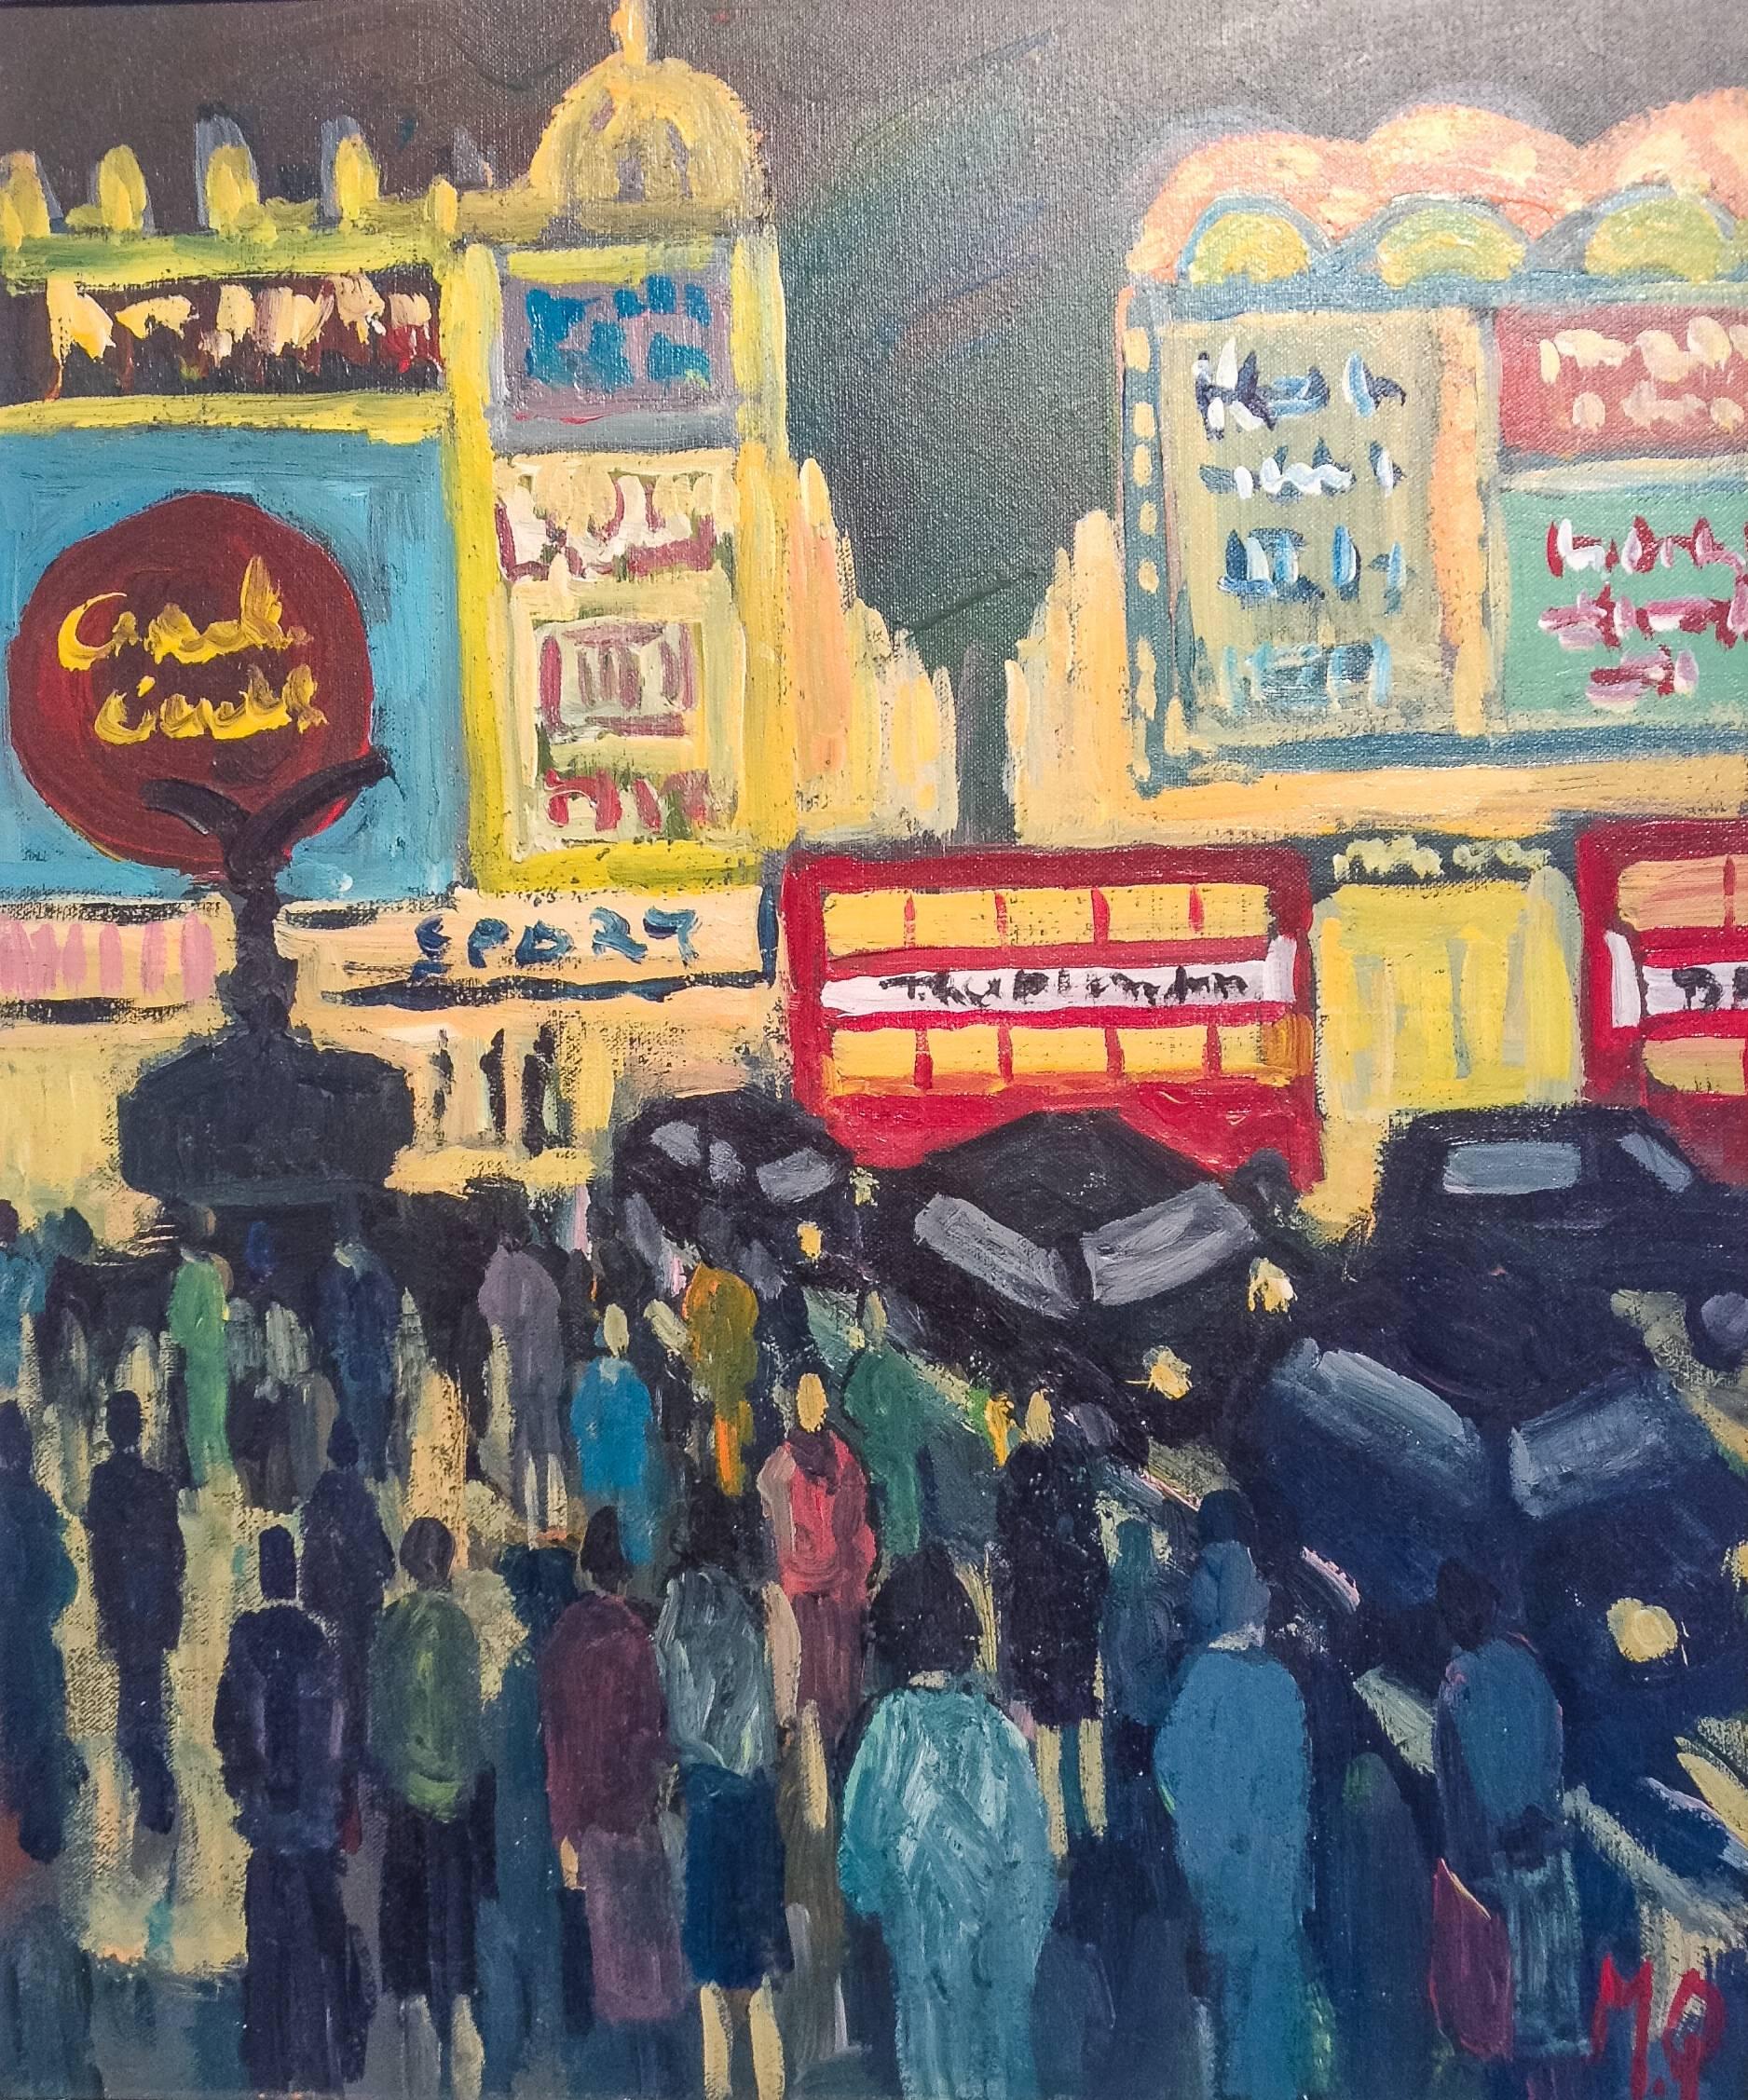 Michael Quirke Landscape Painting - Rush Hour - London cityscape Abstract Figurative Landscape oil painting modern